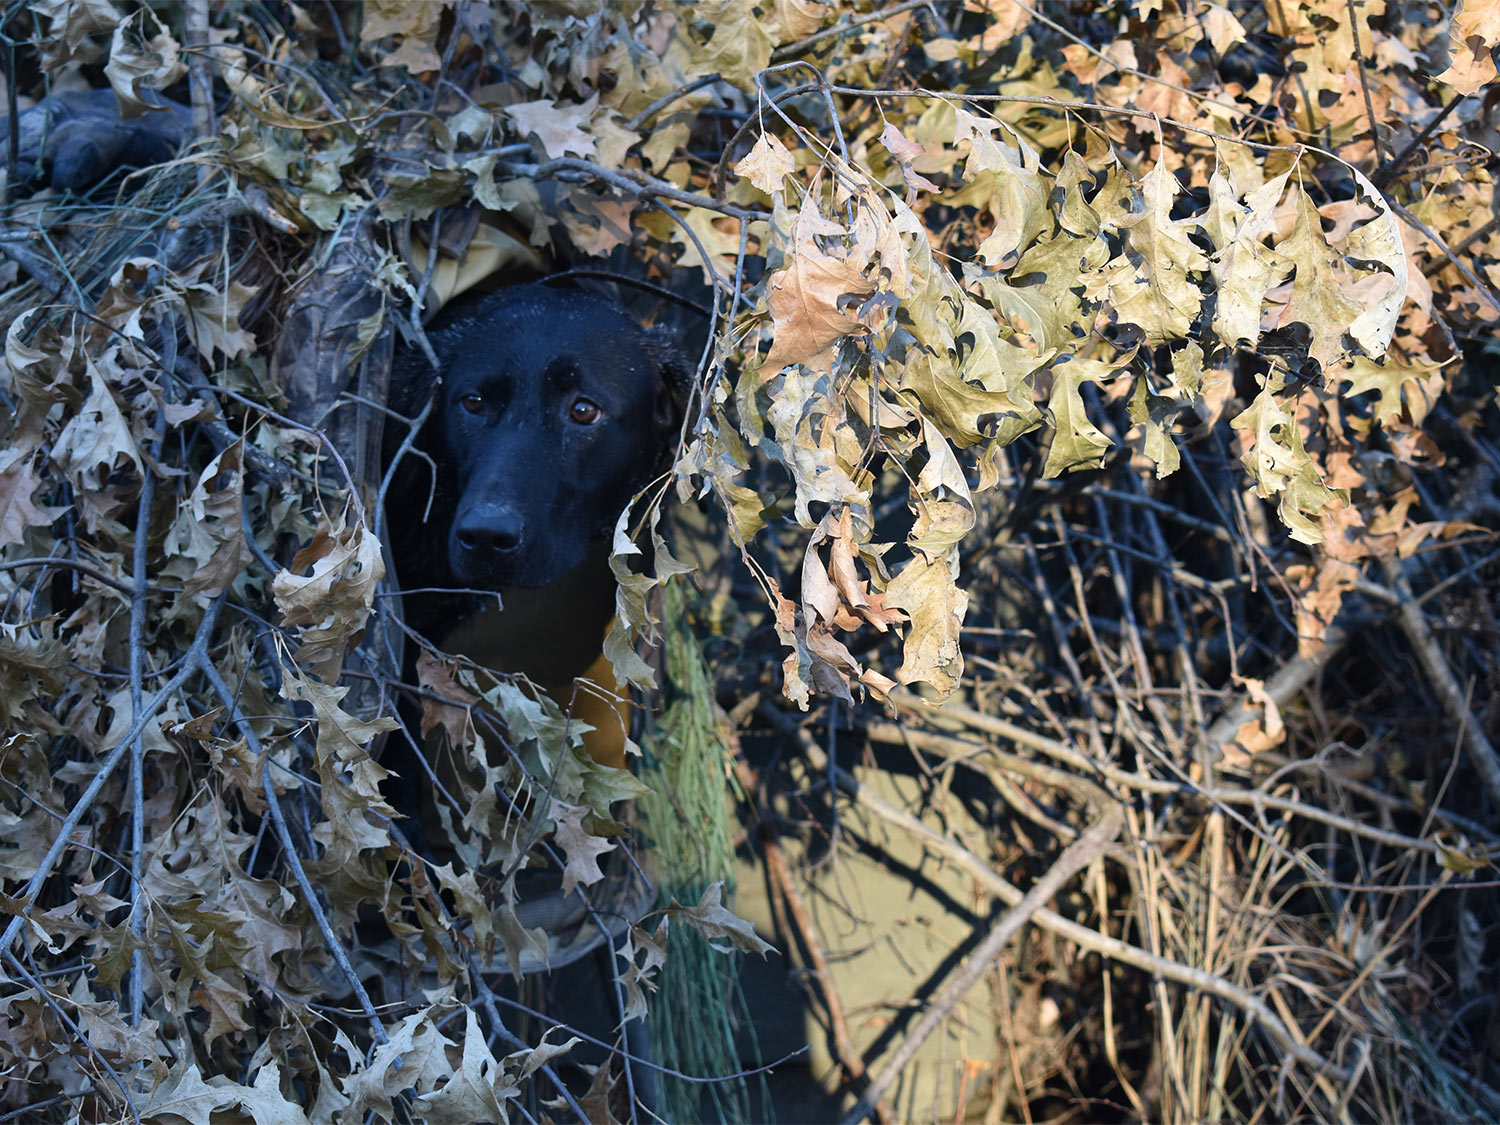 A hunting dog concealed in a hunting blind.